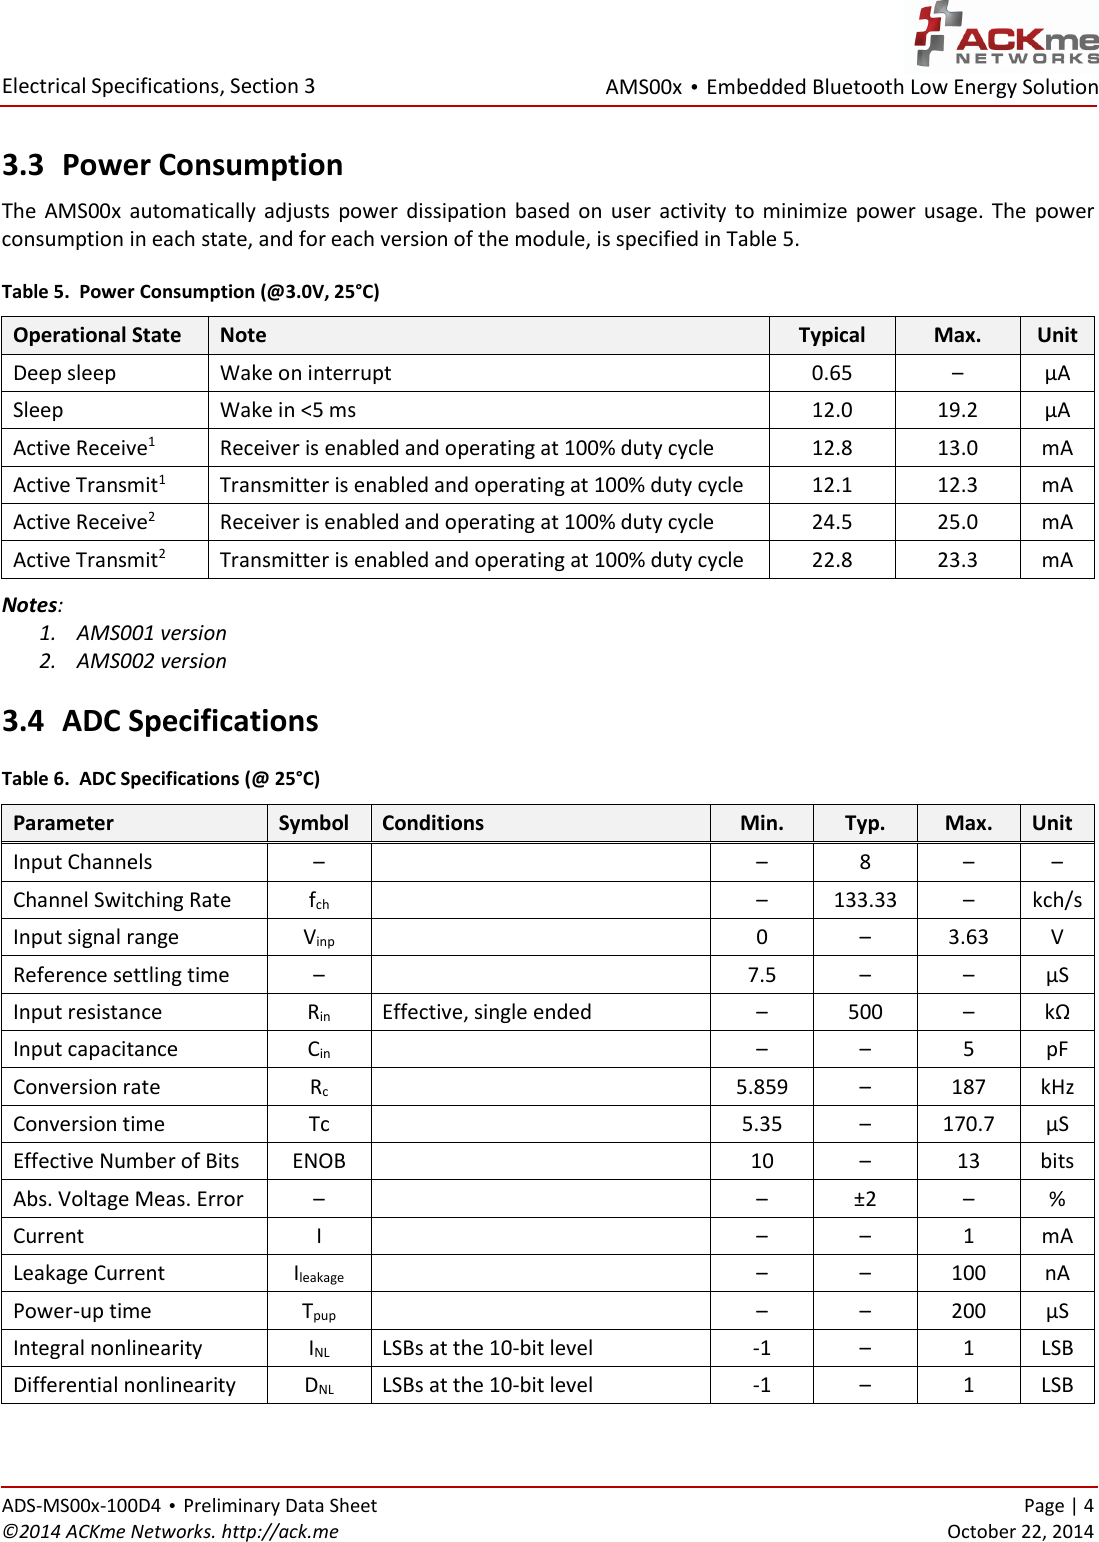 AMS00x • Embedded Bluetooth Low Energy Solution  Electrical Specifications, Section 3 ADS-MS00x-100D4 • Preliminary Data Sheet    Page | 4 ©2014 ACKme Networks. http://ack.me    October 22, 2014 3.3 Power Consumption The  AMS00x  automatically adjusts  power  dissipation  based  on  user  activity  to minimize  power  usage.  The  power consumption in each state, and for each version of the module, is specified in Table 5. Table 5.  Power Consumption (@3.0V, 25°C) Operational State Note Typical Max. Unit Deep sleep Wake on interrupt 0.65 – µA Sleep Wake in &lt;5 ms 12.0 19.2 µA Active Receive1 Receiver is enabled and operating at 100% duty cycle 12.8 13.0 mA Active Transmit1 Transmitter is enabled and operating at 100% duty cycle 12.1 12.3 mA Active Receive2 Receiver is enabled and operating at 100% duty cycle 24.5 25.0 mA Active Transmit2 Transmitter is enabled and operating at 100% duty cycle 22.8 23.3 mA Notes:  1. AMS001 version 2. AMS002 version 3.4 ADC Specifications Table 6.  ADC Specifications (@ 25°C) Parameter Symbol Conditions Min. Typ. Max. Unit Input Channels –  – 8 – – Channel Switching Rate fch  – 133.33 – kch/s Input signal range Vinp  0 – 3.63 V Reference settling time –  7.5 – – µS Input resistance Rin Effective, single ended – 500 – kΩ Input capacitance Cin  – – 5 pF Conversion rate Rc  5.859 – 187 kHz Conversion time Tc  5.35 – 170.7 µS Effective Number of Bits ENOB  10 – 13 bits Abs. Voltage Meas. Error –  – ±2 – % Current I  – – 1 mA Leakage Current Ileakage  – – 100 nA Power-up time Tpup  – – 200 µS Integral nonlinearity INL LSBs at the 10-bit level -1 – 1 LSB Differential nonlinearity DNL LSBs at the 10-bit level -1 – 1 LSB  